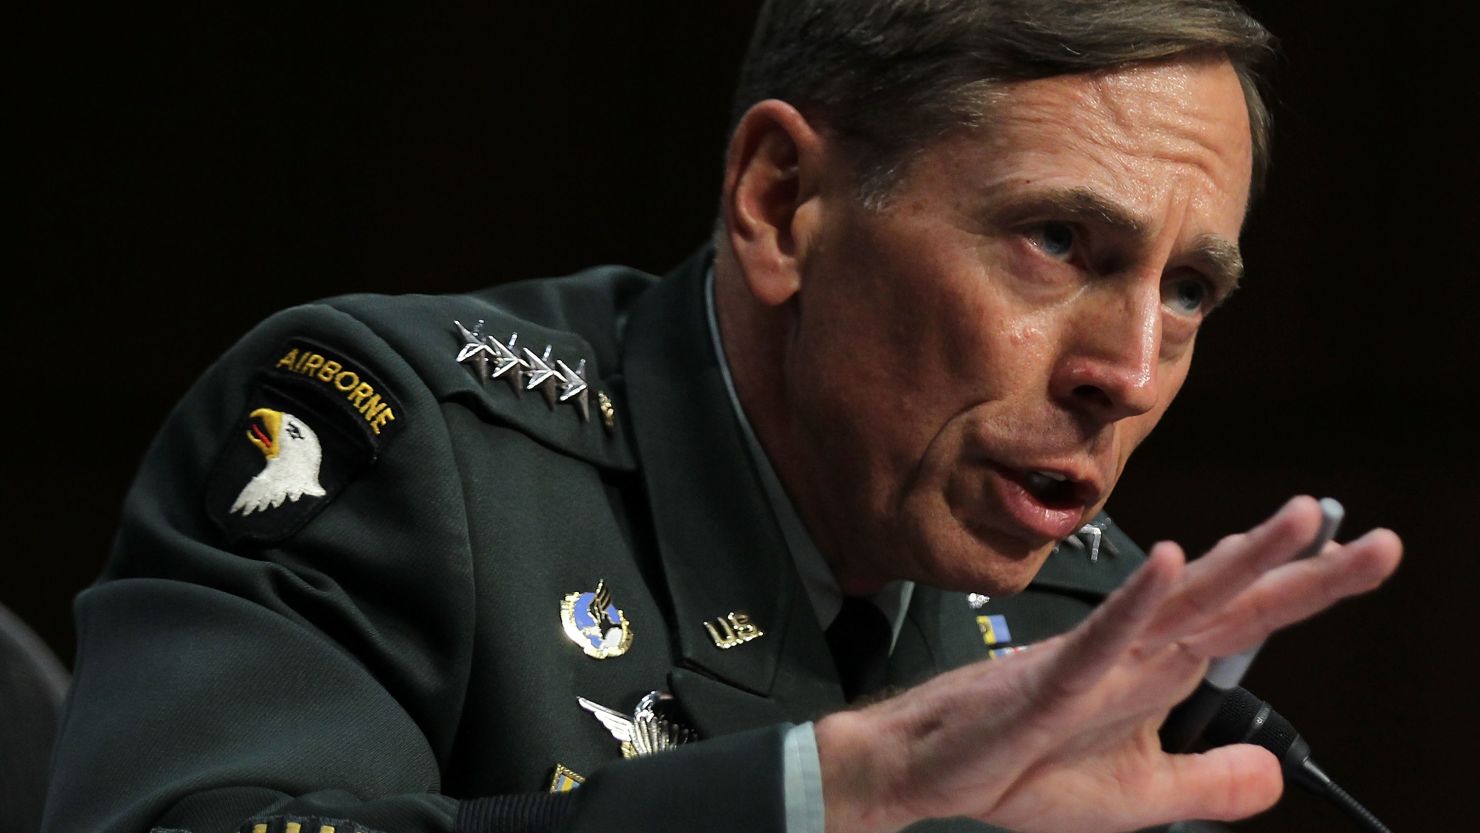 The scandal involving General David Petraeus is an occasion to examine the way Washington and the media work, says Frida Ghitis.